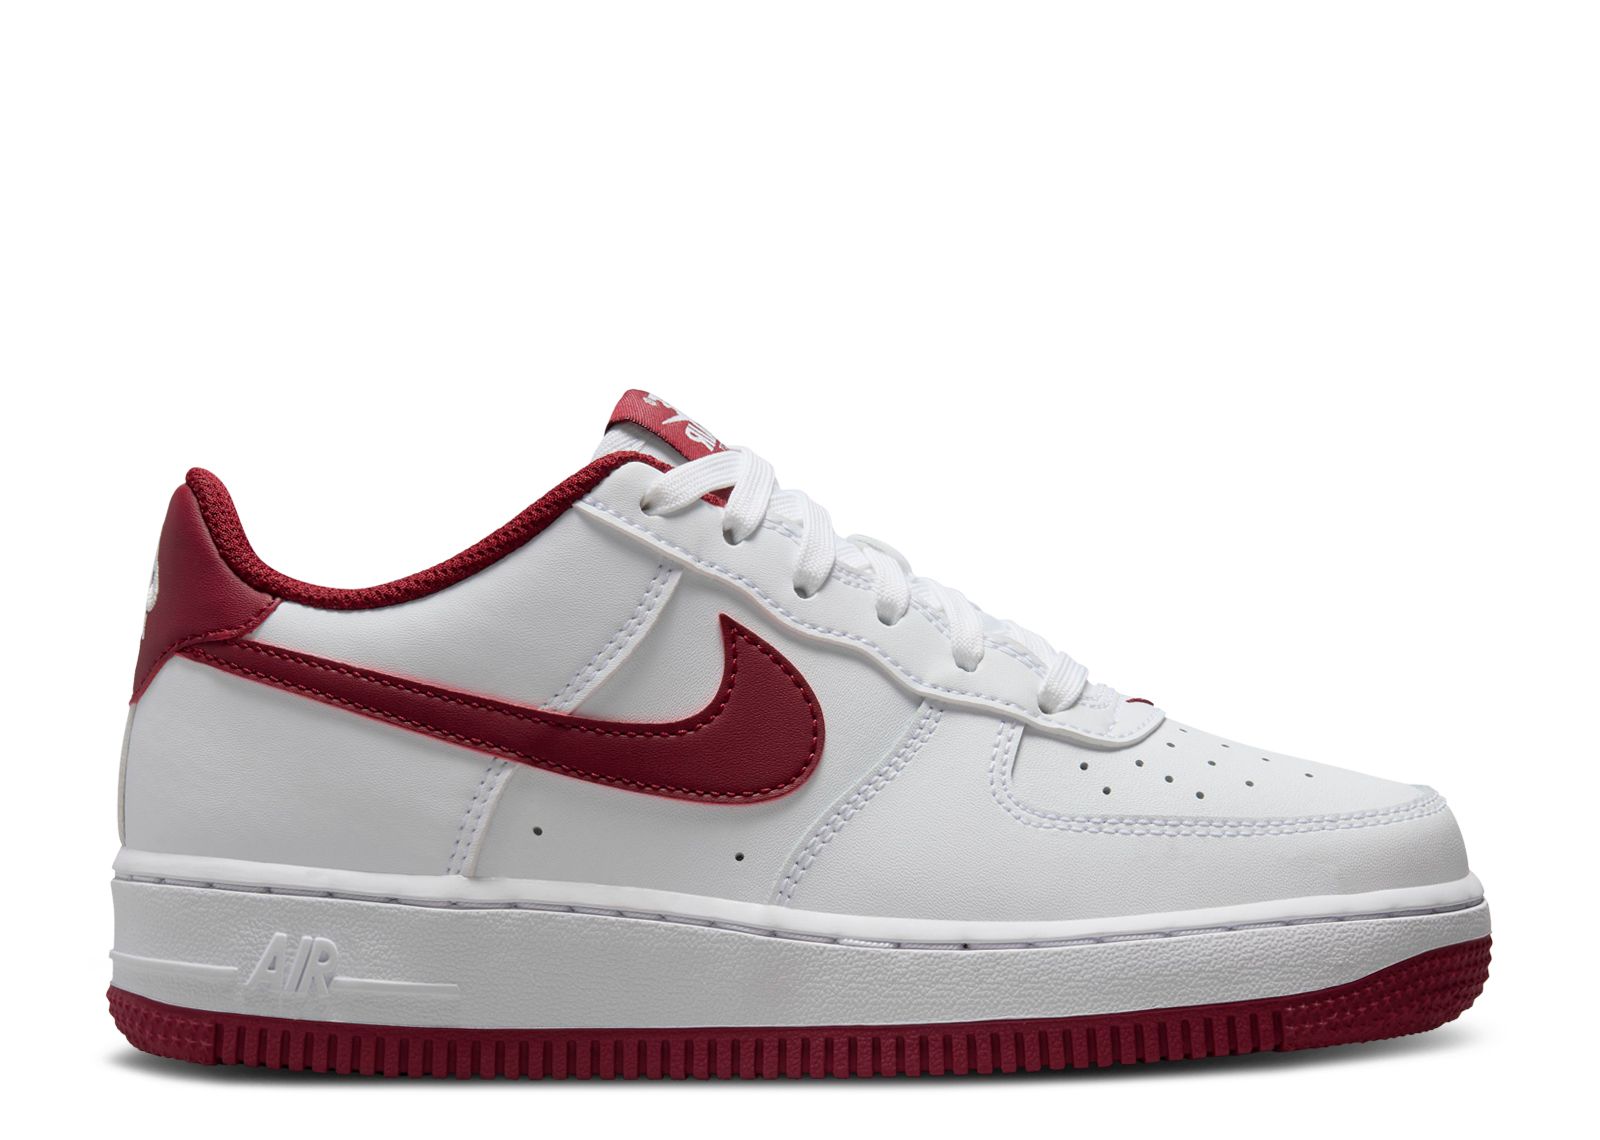 Кроссовки Nike Air Force 1 Gs 'White Team Red', белый new nike air force 1 script swoosh women white skateboarding shoes original light weight outdoor sports sneakers